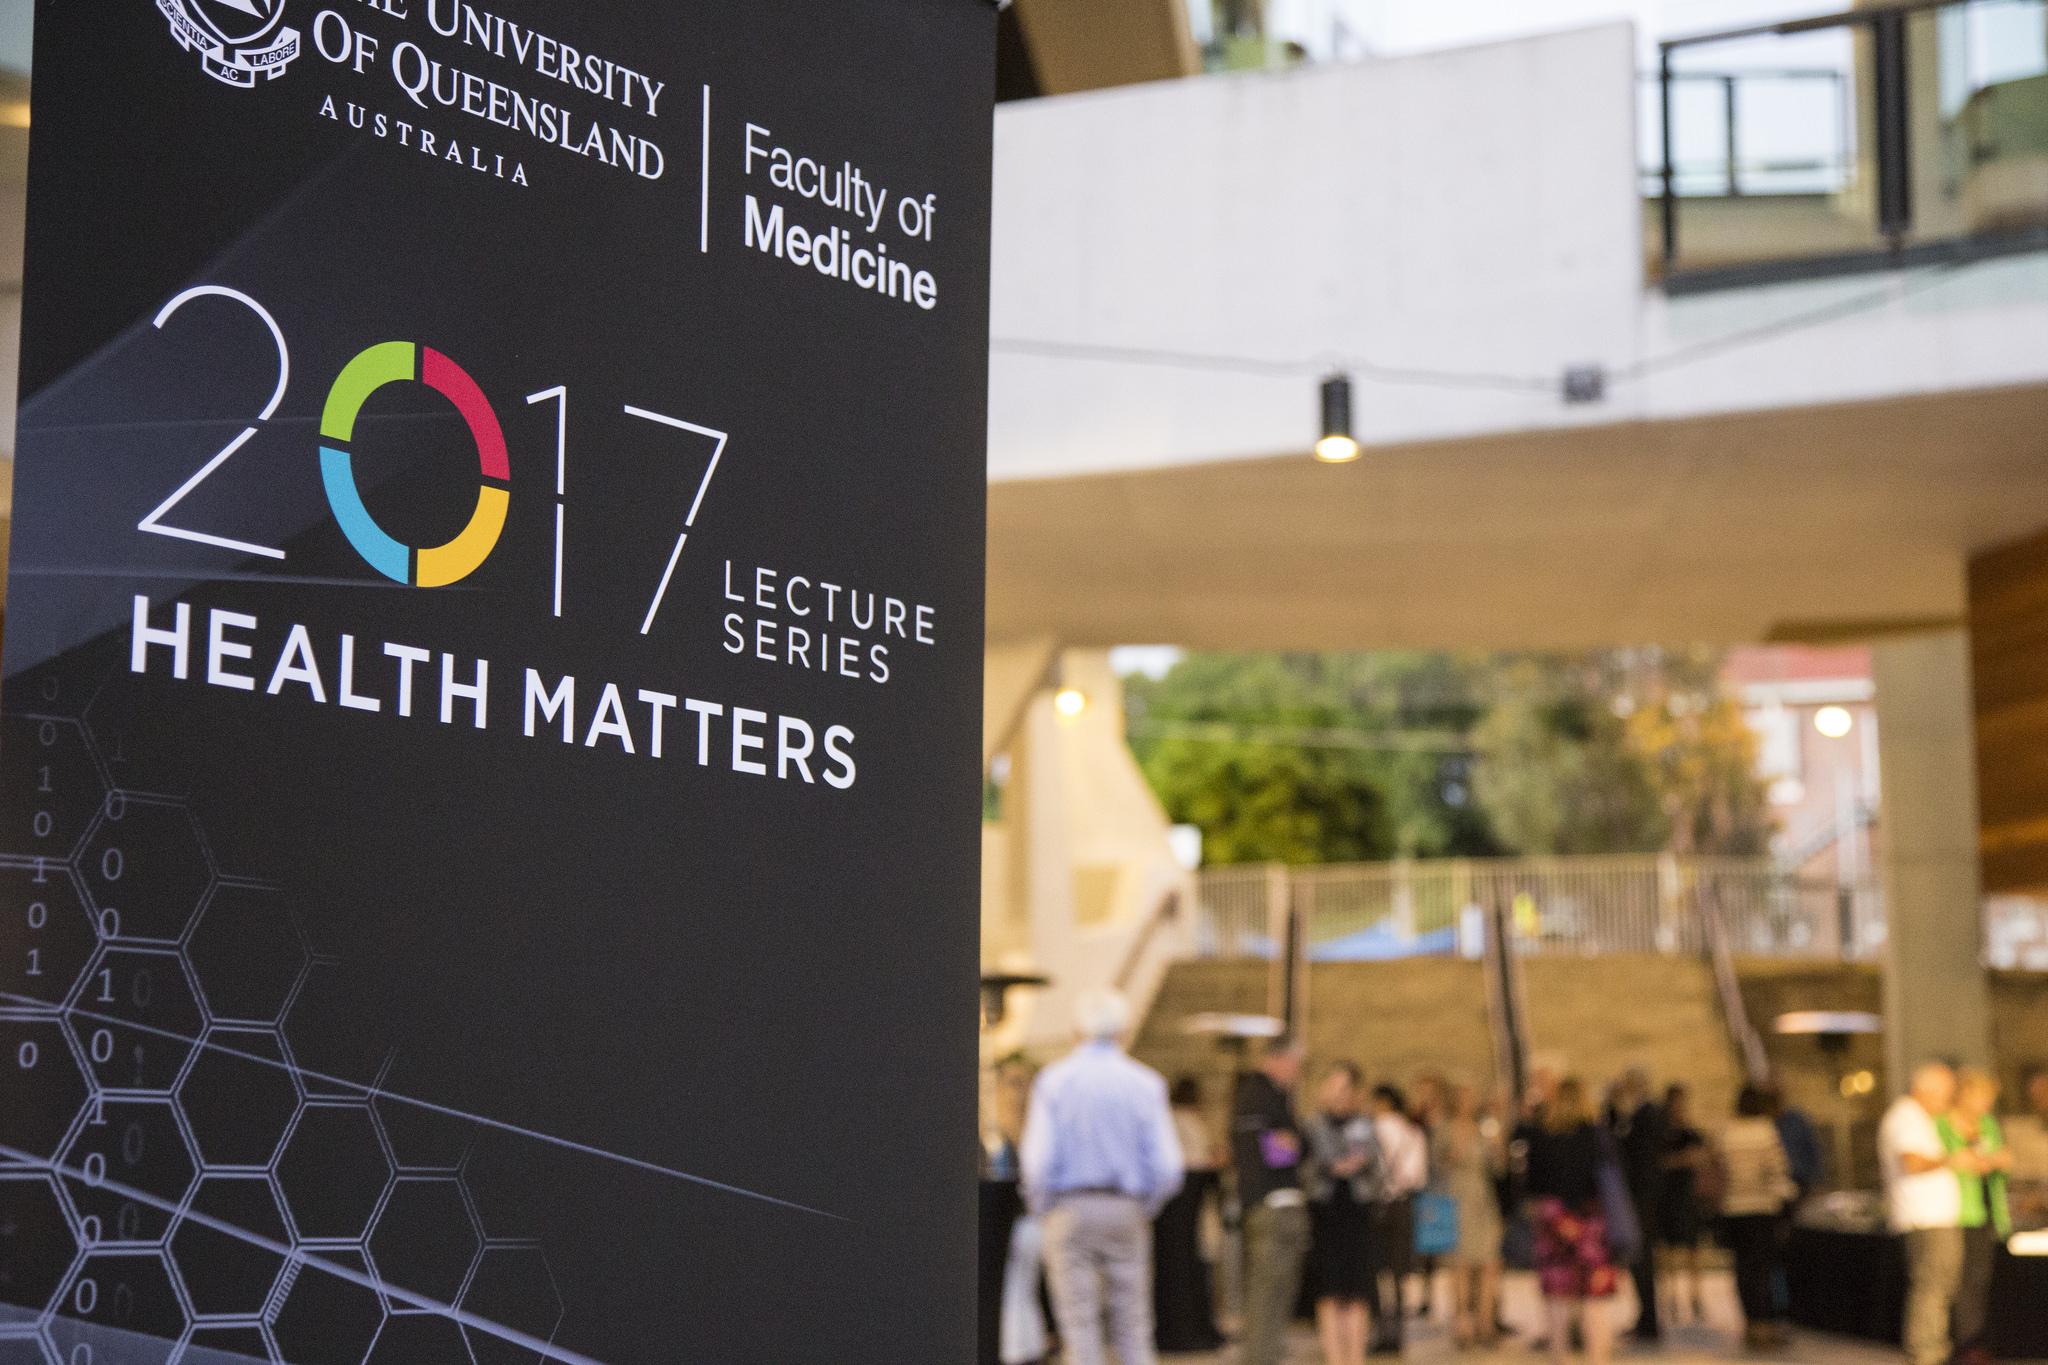 Professor Harvey Whiteford and Associate Professor James Scott were speakers at a UQ Faculty of Medicine ‘Health Matters’ lecture examining the issue.